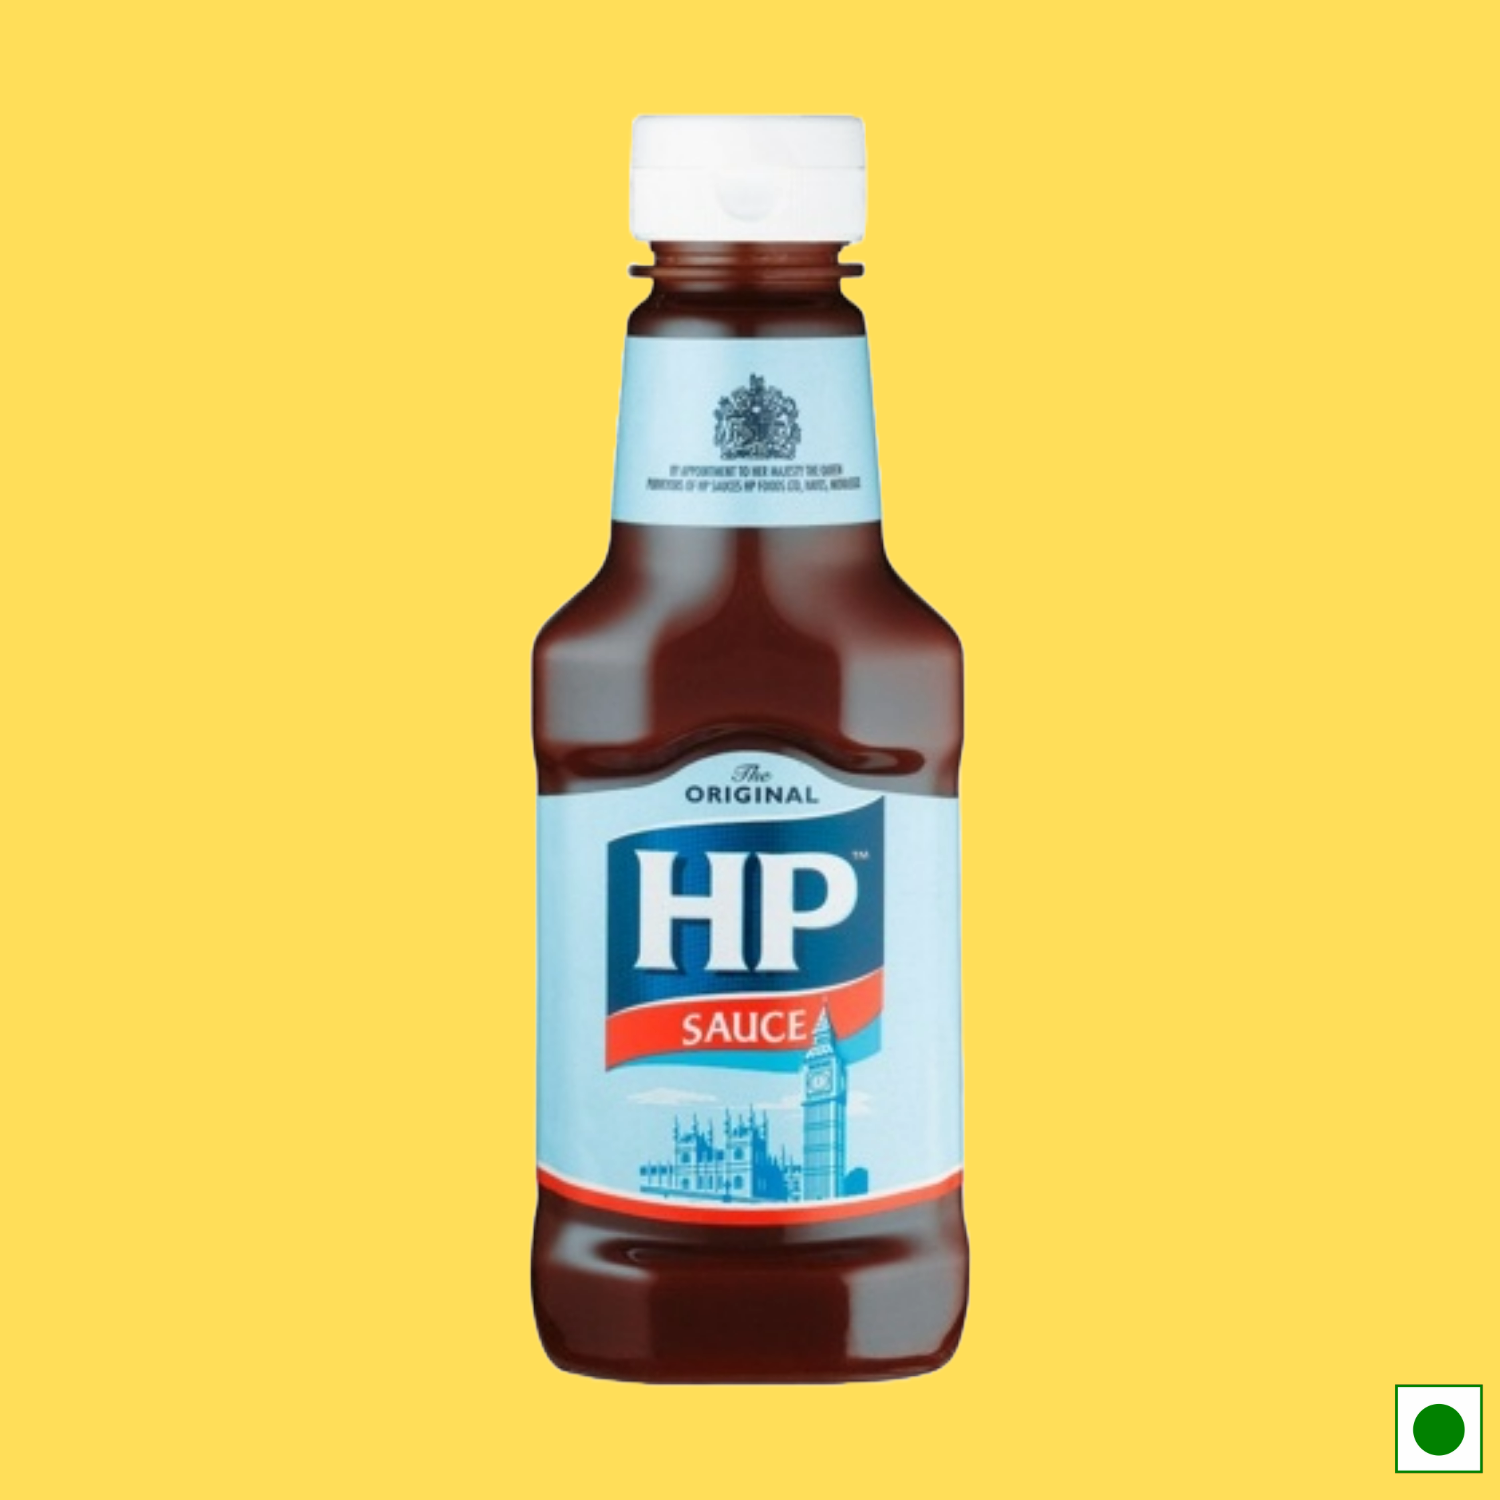 HP Original Brown Sauce, 285g (Imported)